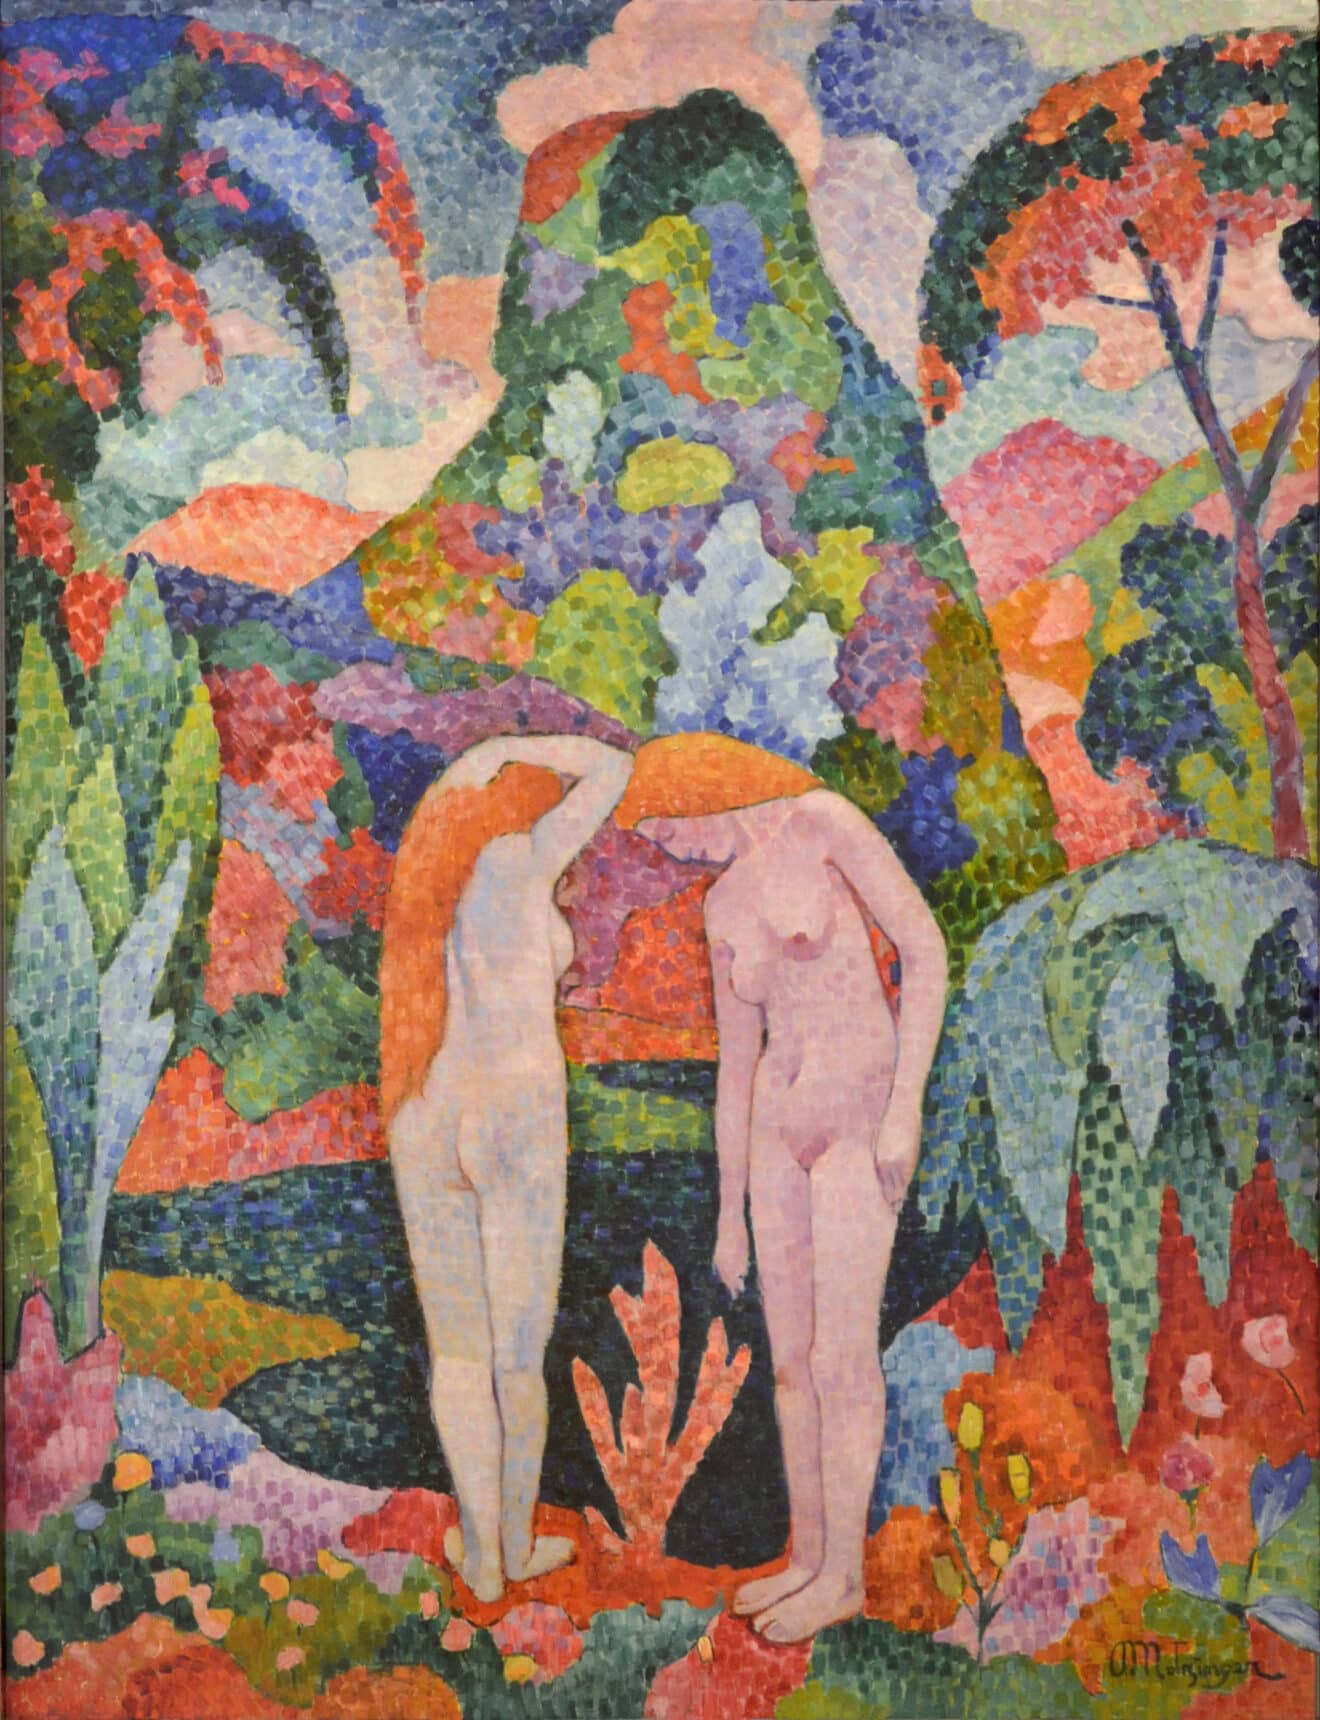 Nude paintings in nature- Jean Metzinger, Two Nudes in an Exotic Landscape, ca. 1905,